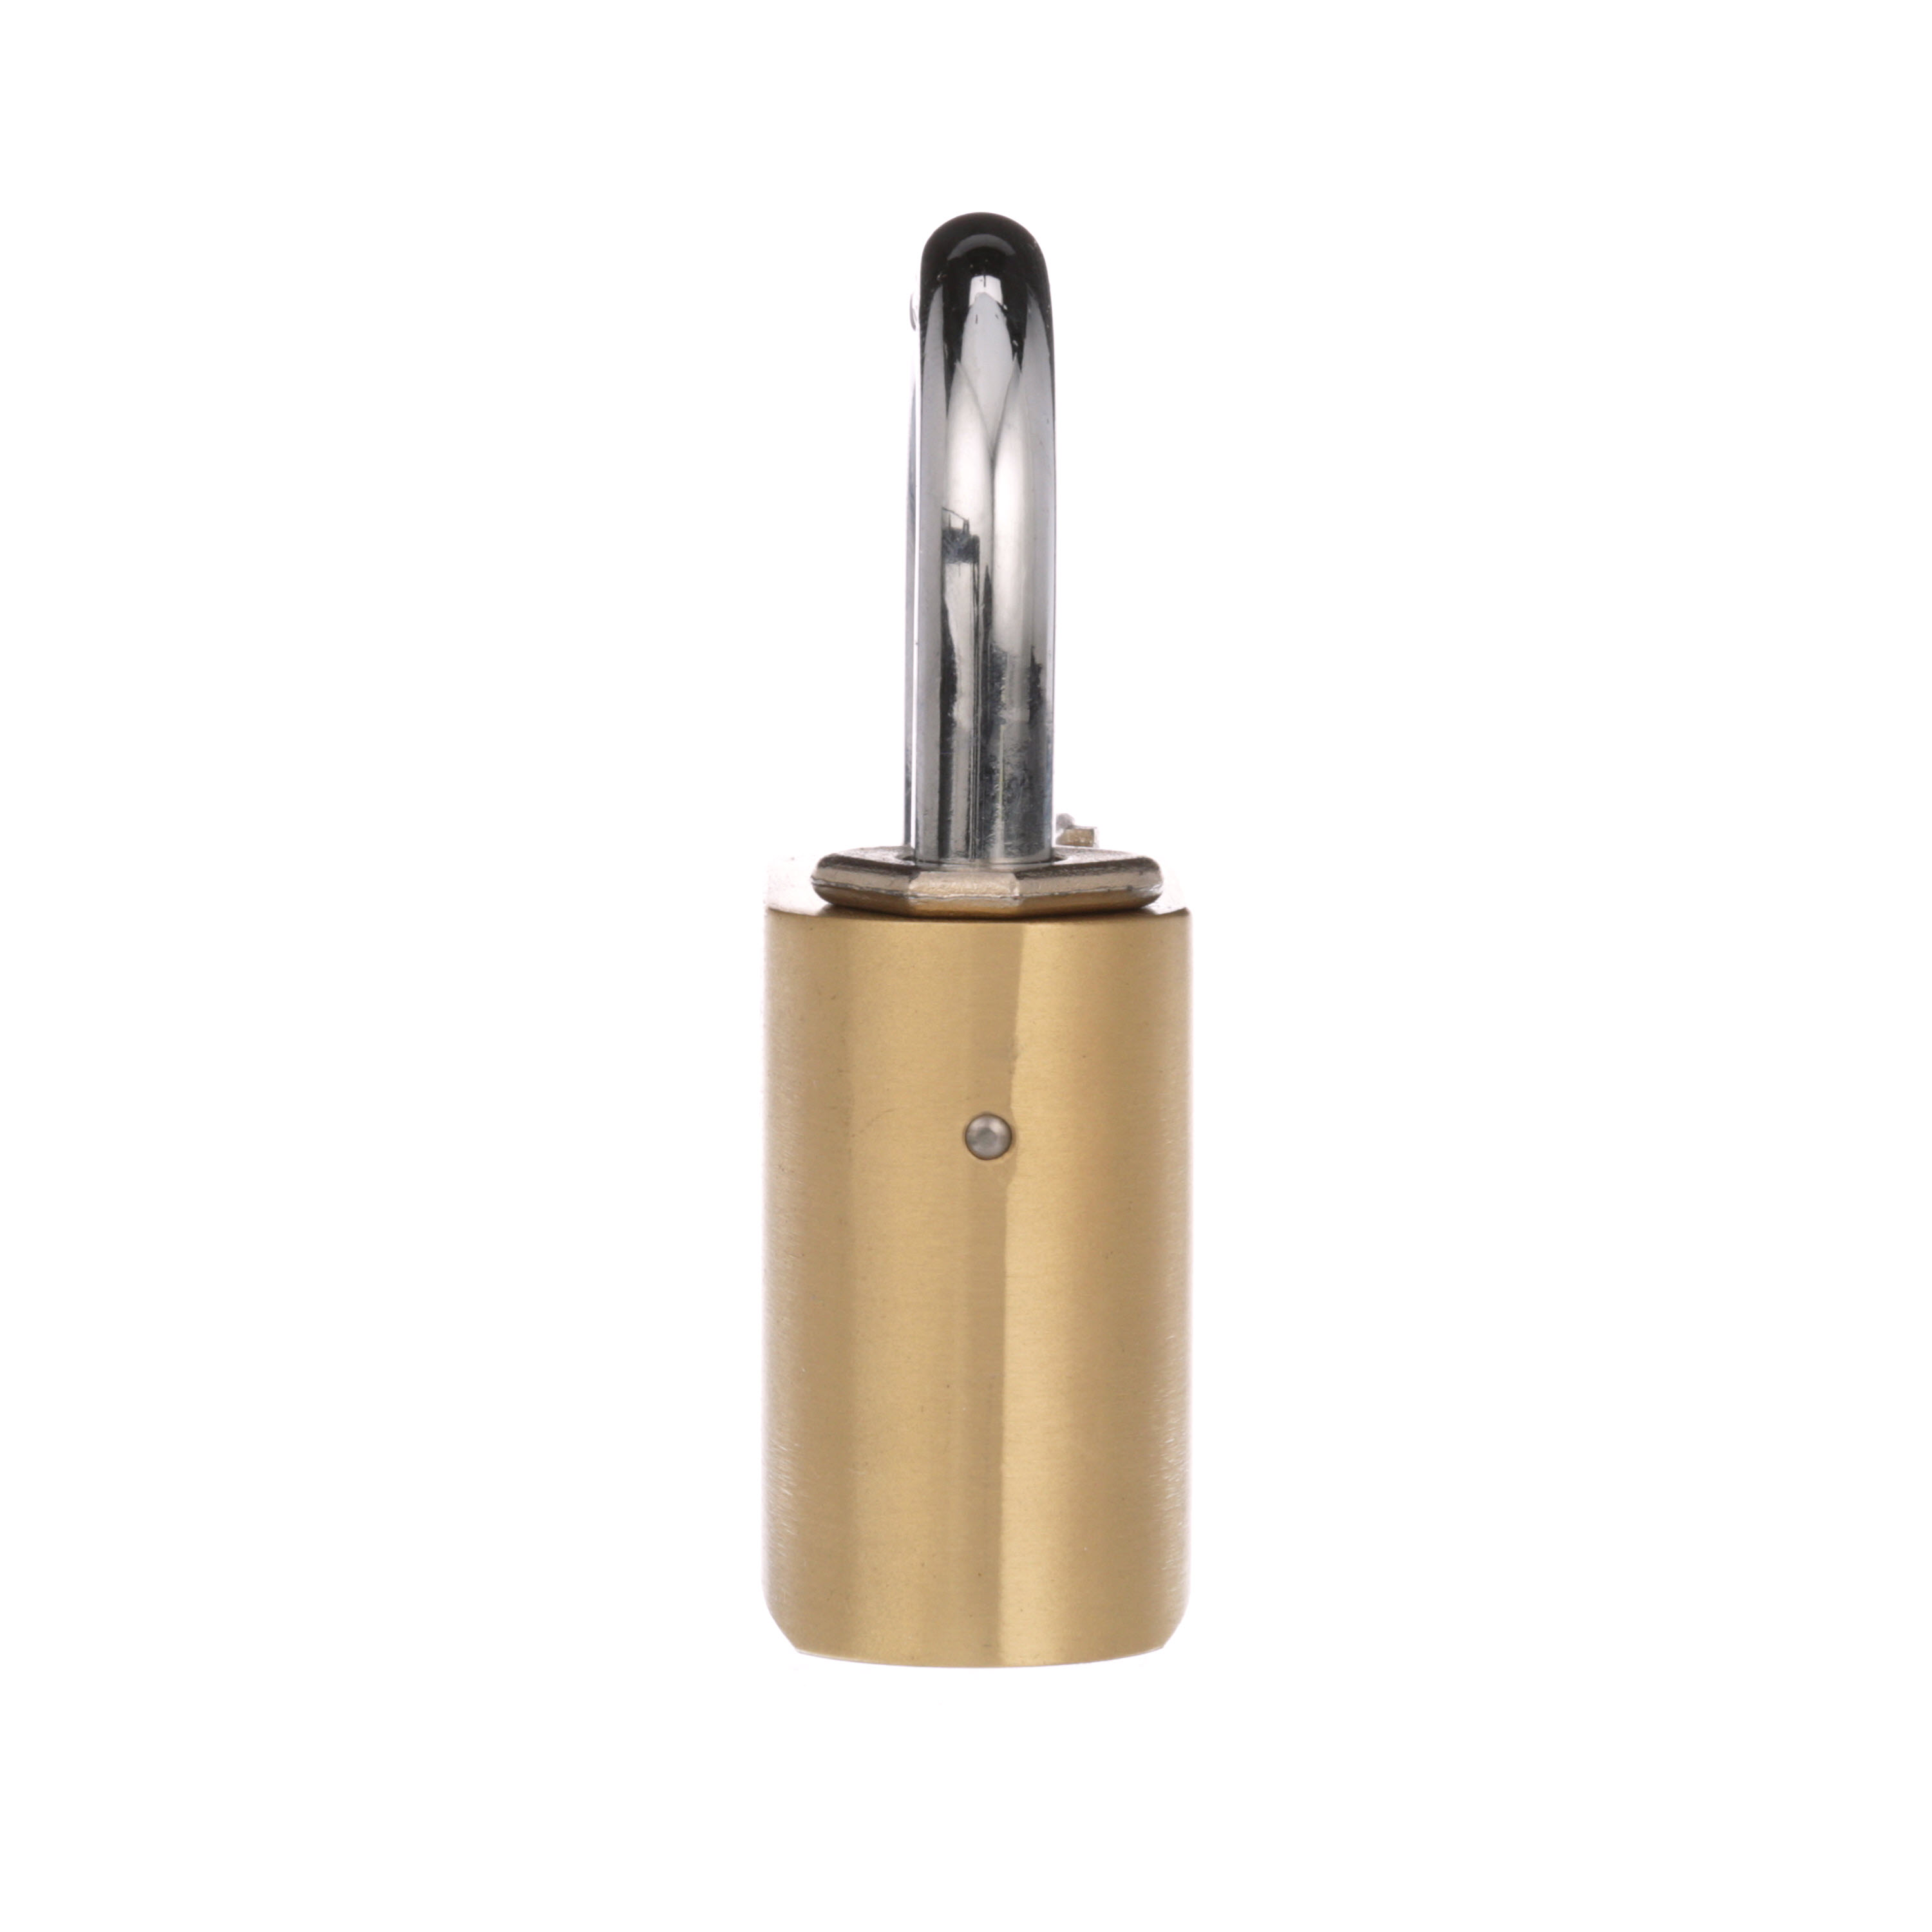 Brinks Solid Brass 50mm Resettable Combination Padlock with 1in Shackle - image 3 of 7